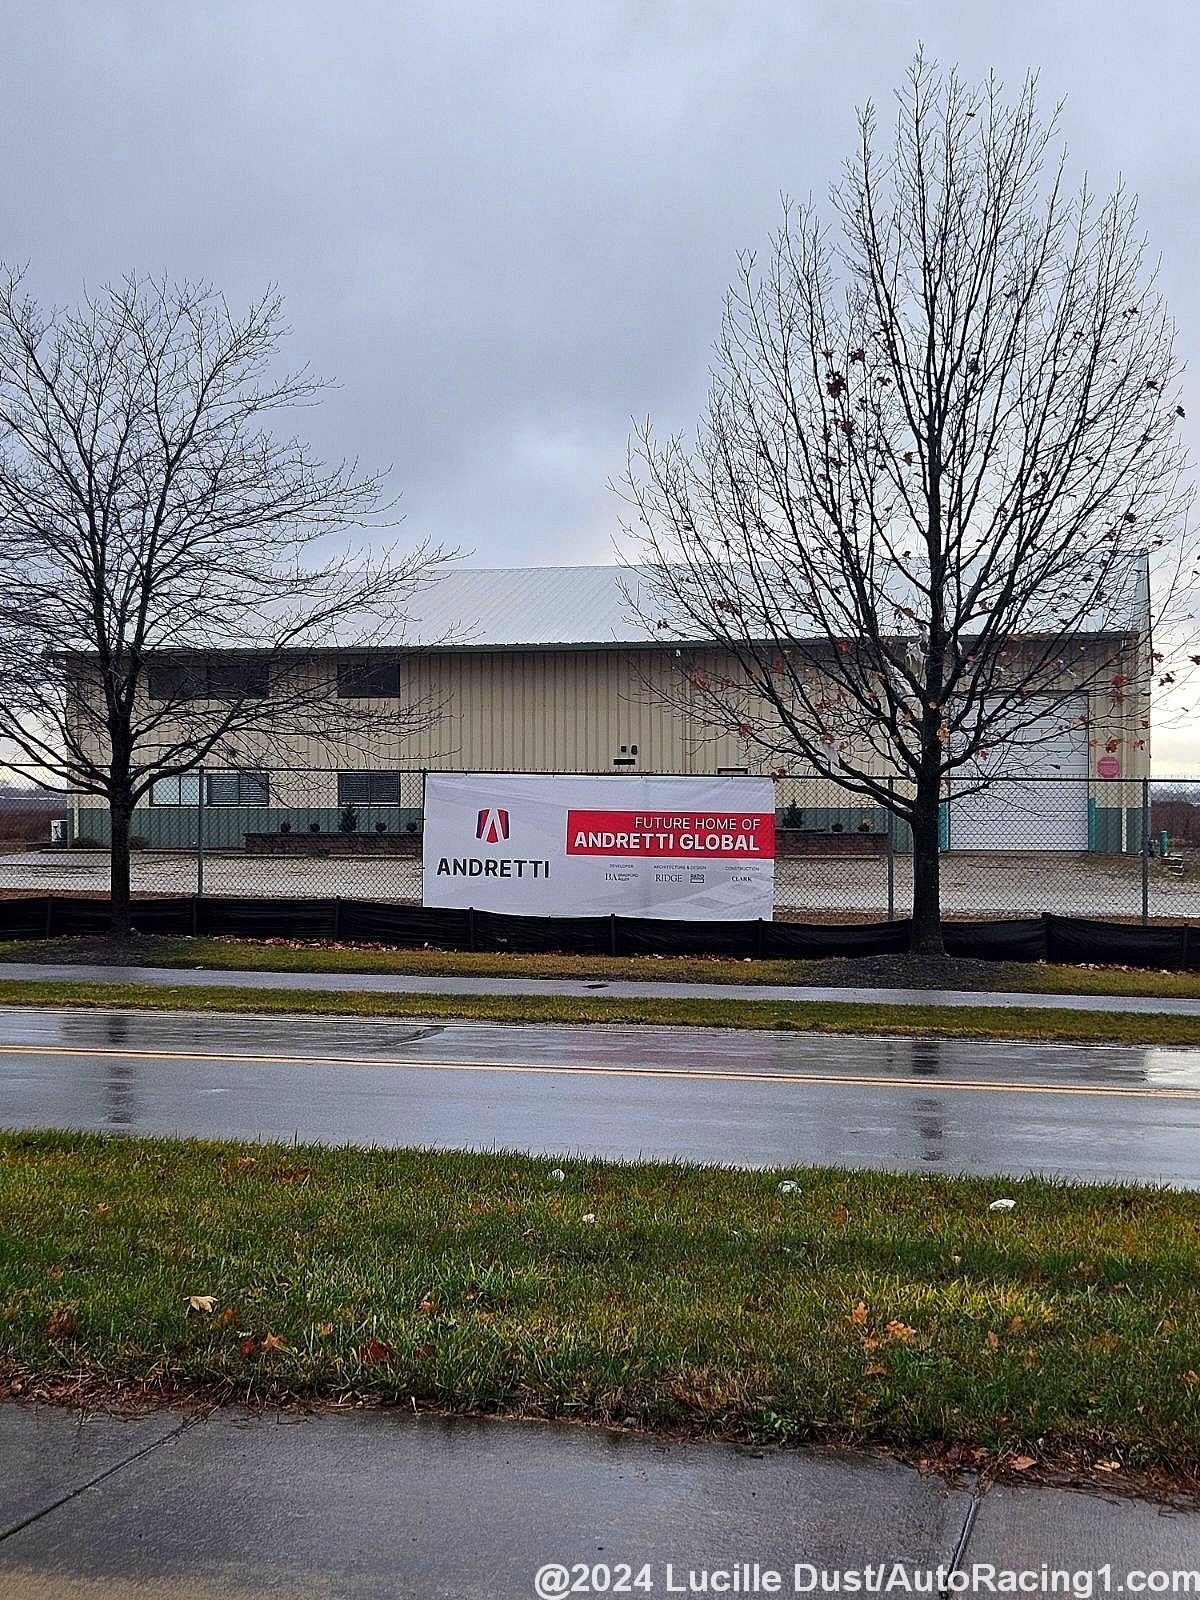 On a cold rainy day in Indian Tuesday, we snapped this photo of the new Andretti Global Headquarters site in Fishers, Indiana. Perhaps no construction has started because Andretti really wants to buy an existing team - like Haas